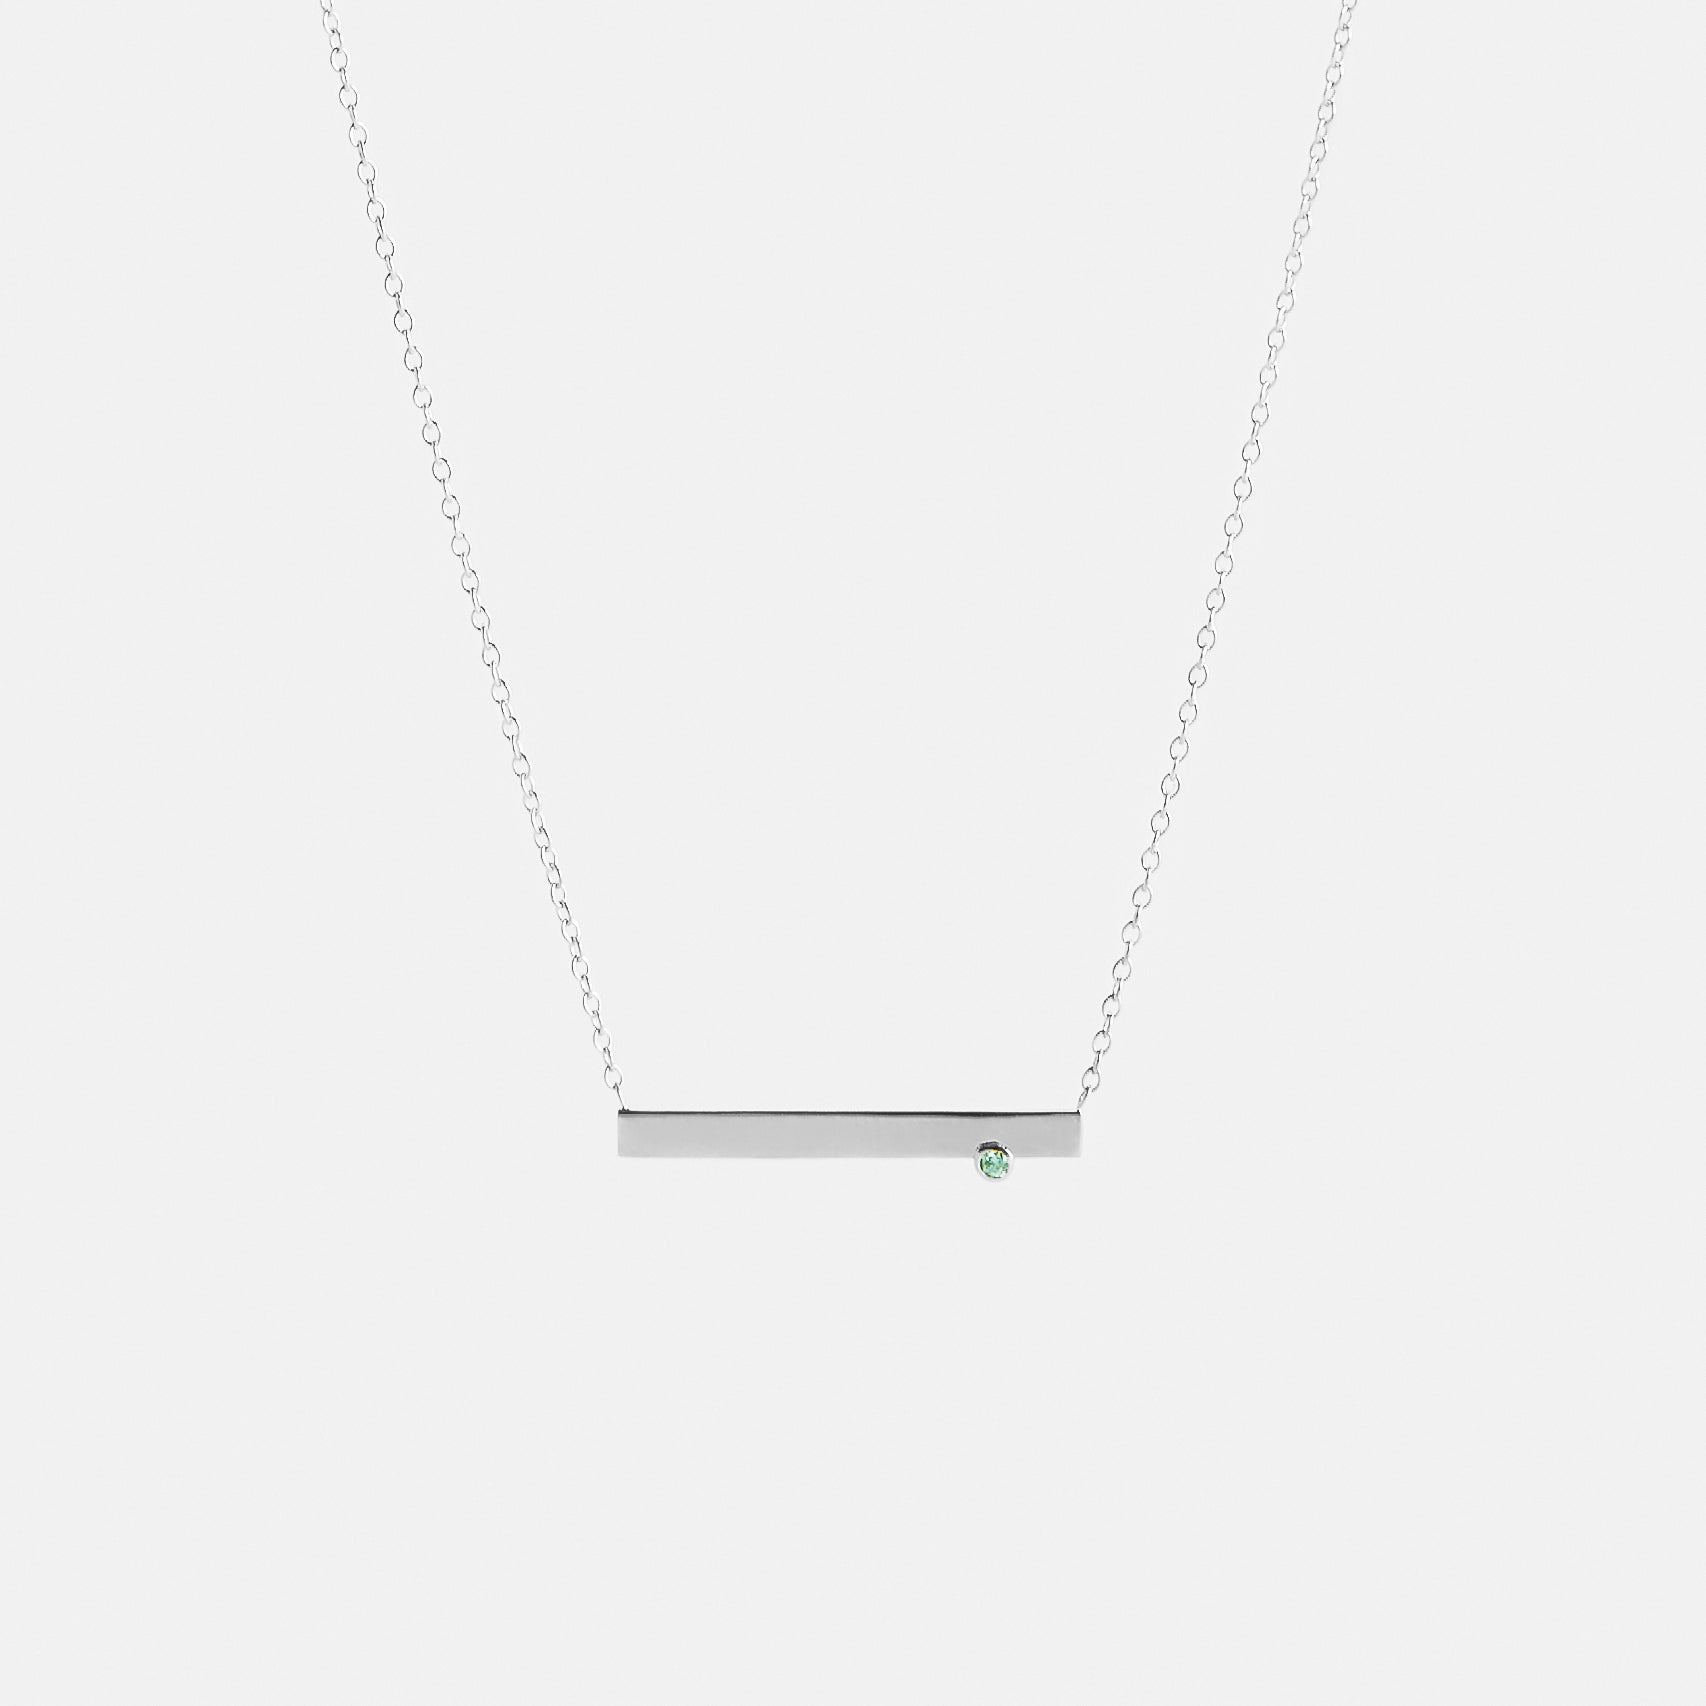 Lane Unconventional Necklace in 14k White Gold set with Green Diamond By SHW Fine Jewelry New York City